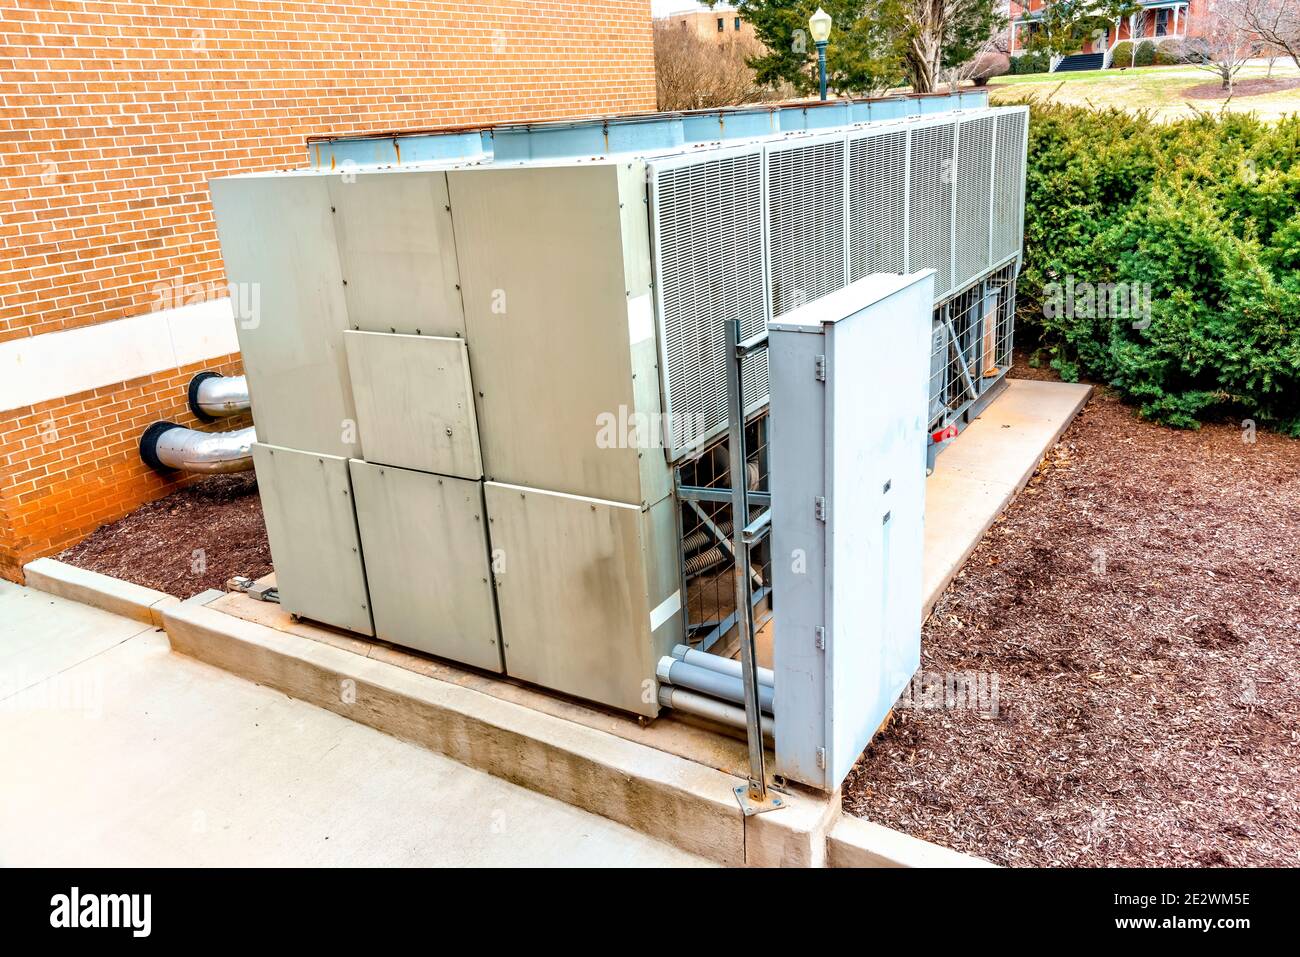 Horizontal shot of a large air conditioning and heating system for a residential complex. Stock Photo